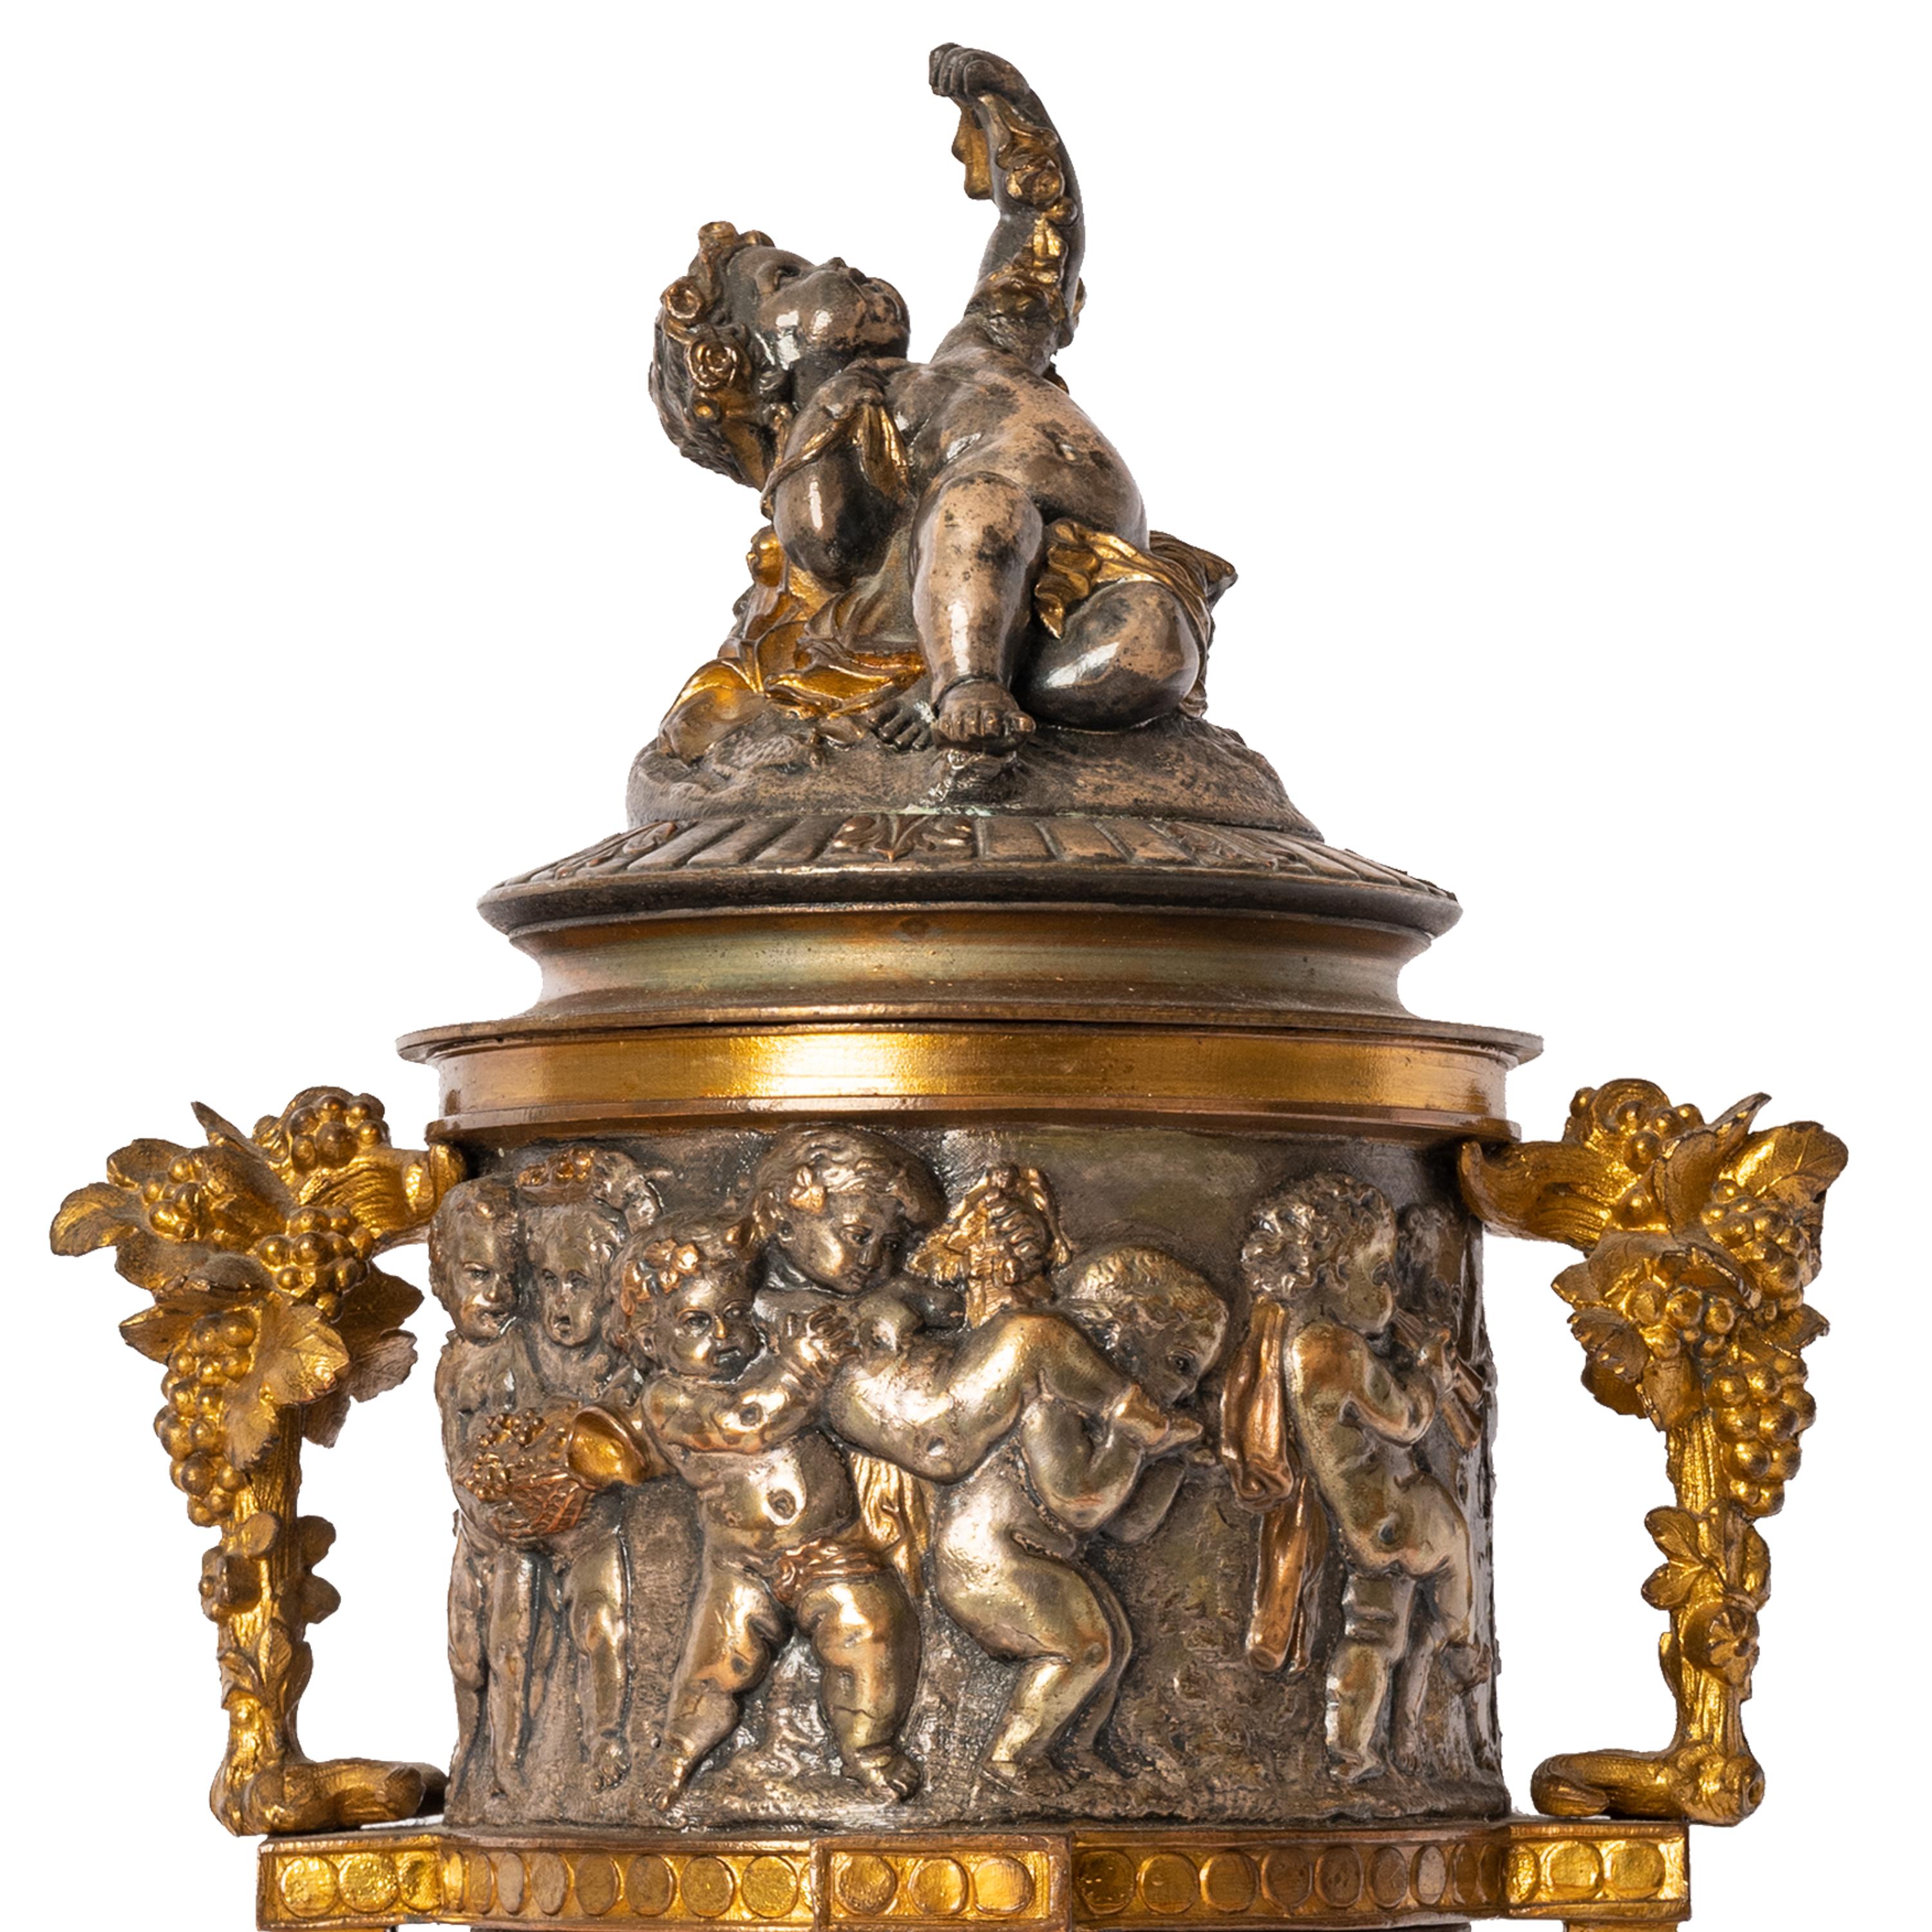 A Fine antique French gilded bronze lidded urn/wine cooler, Napoleon III period, in the style of Claude Michel Clodion, circa 1870.
This very elegant urn is made of patinated bronze with gilded accents, the lid having a reclining putto. The body of